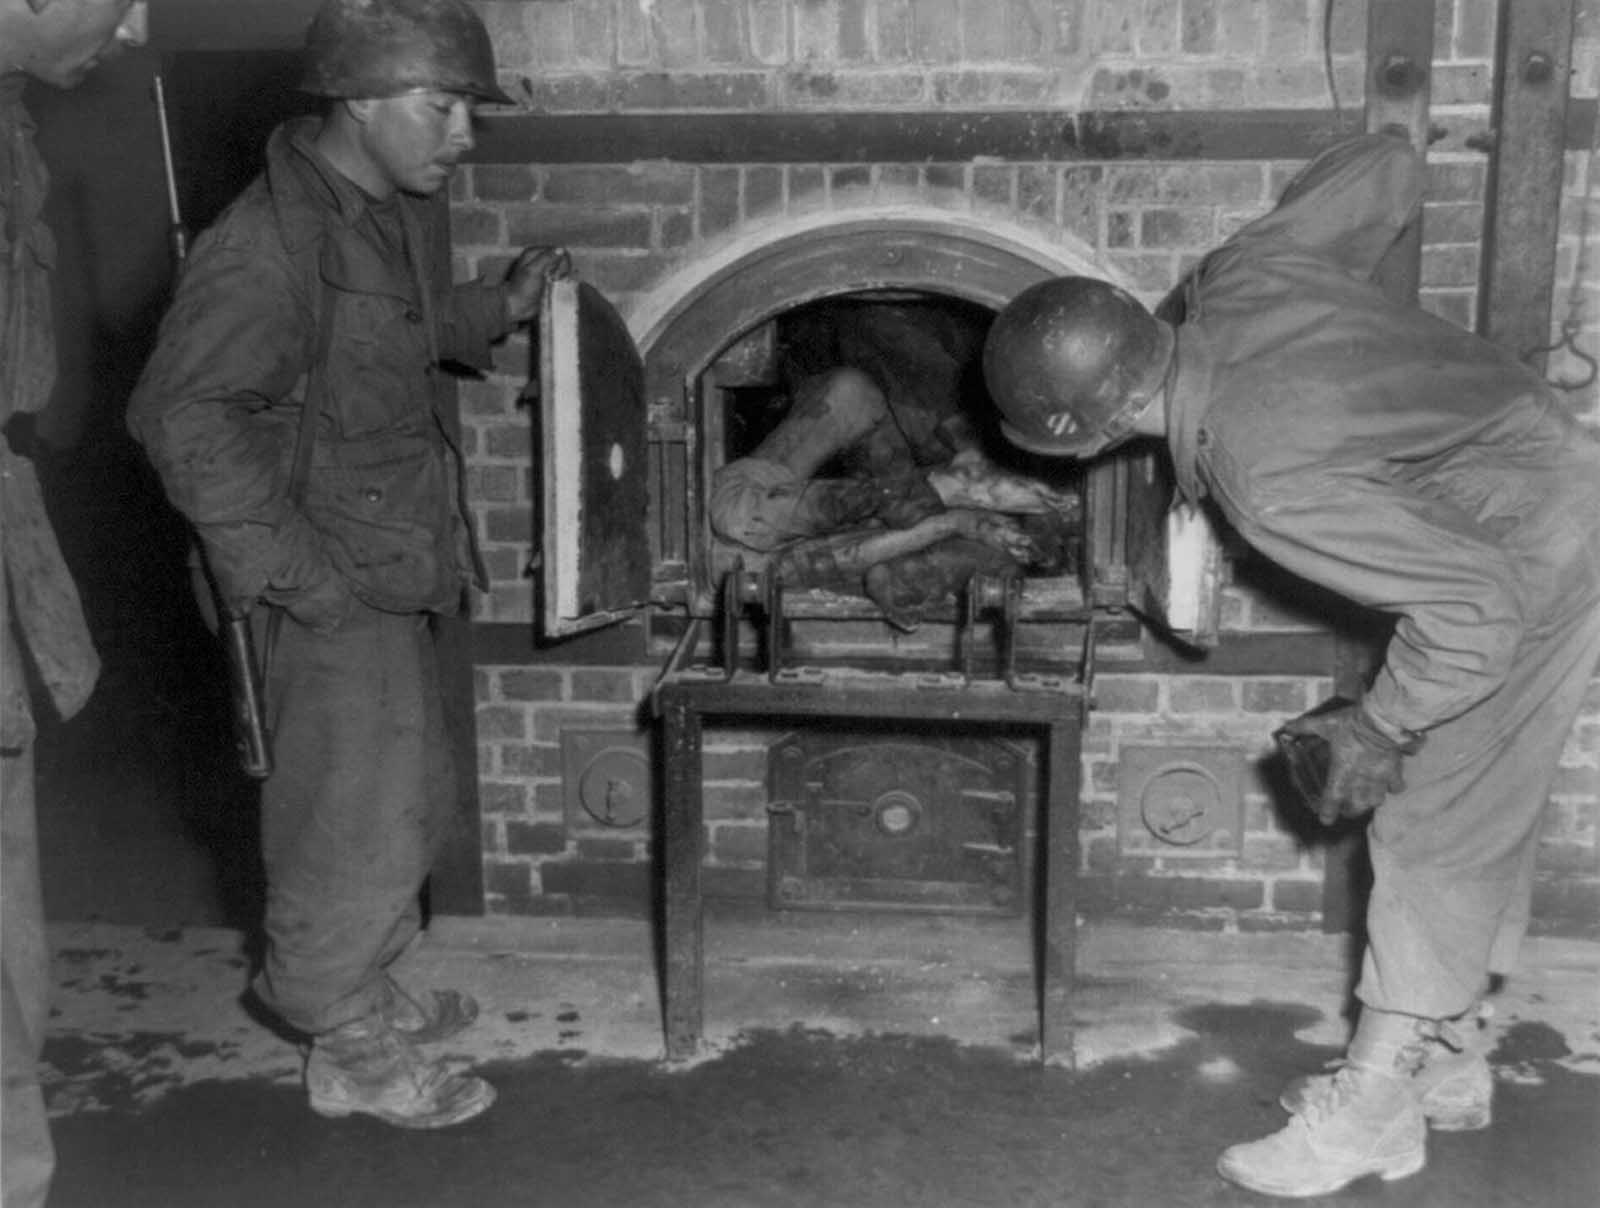 Three U.S. soldiers look at bodies stuffed into an oven in a crematorium in April of 1945. Photo taken in an unidentified concentration camp in Germany, at time of liberation by U.S. Army.